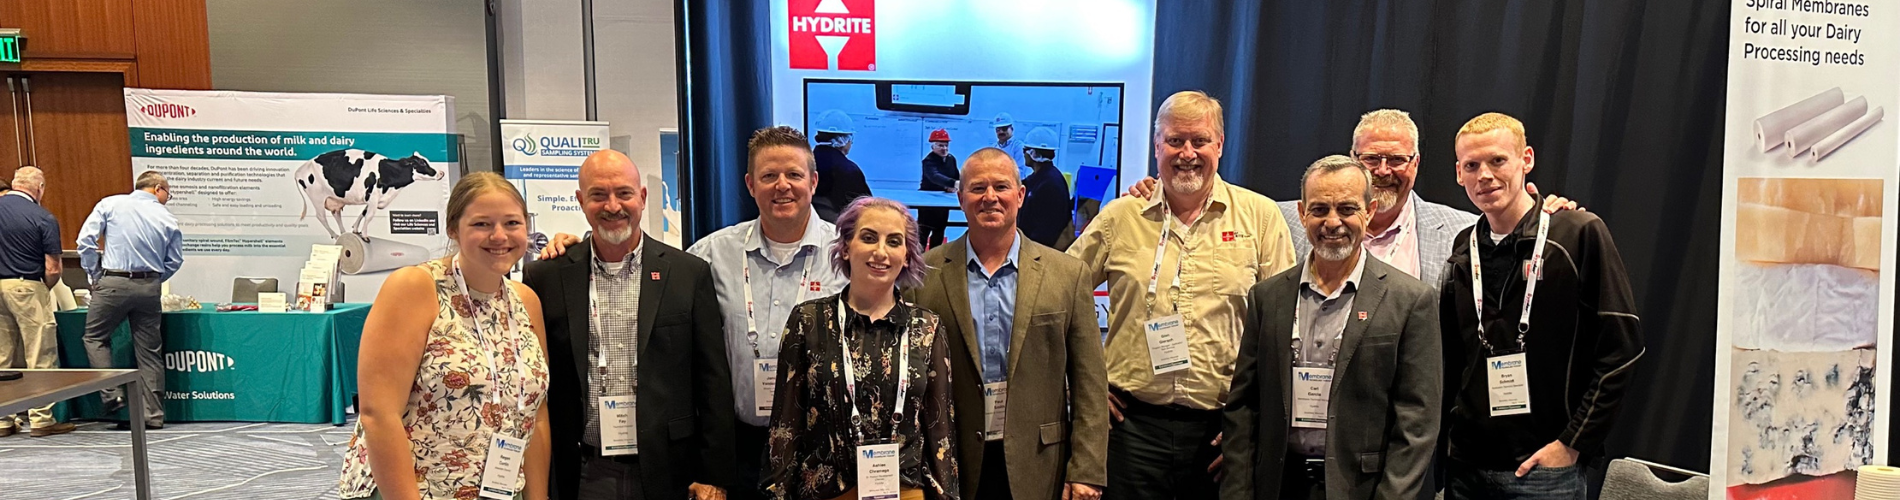 Hydrite Employees at a Trade Show